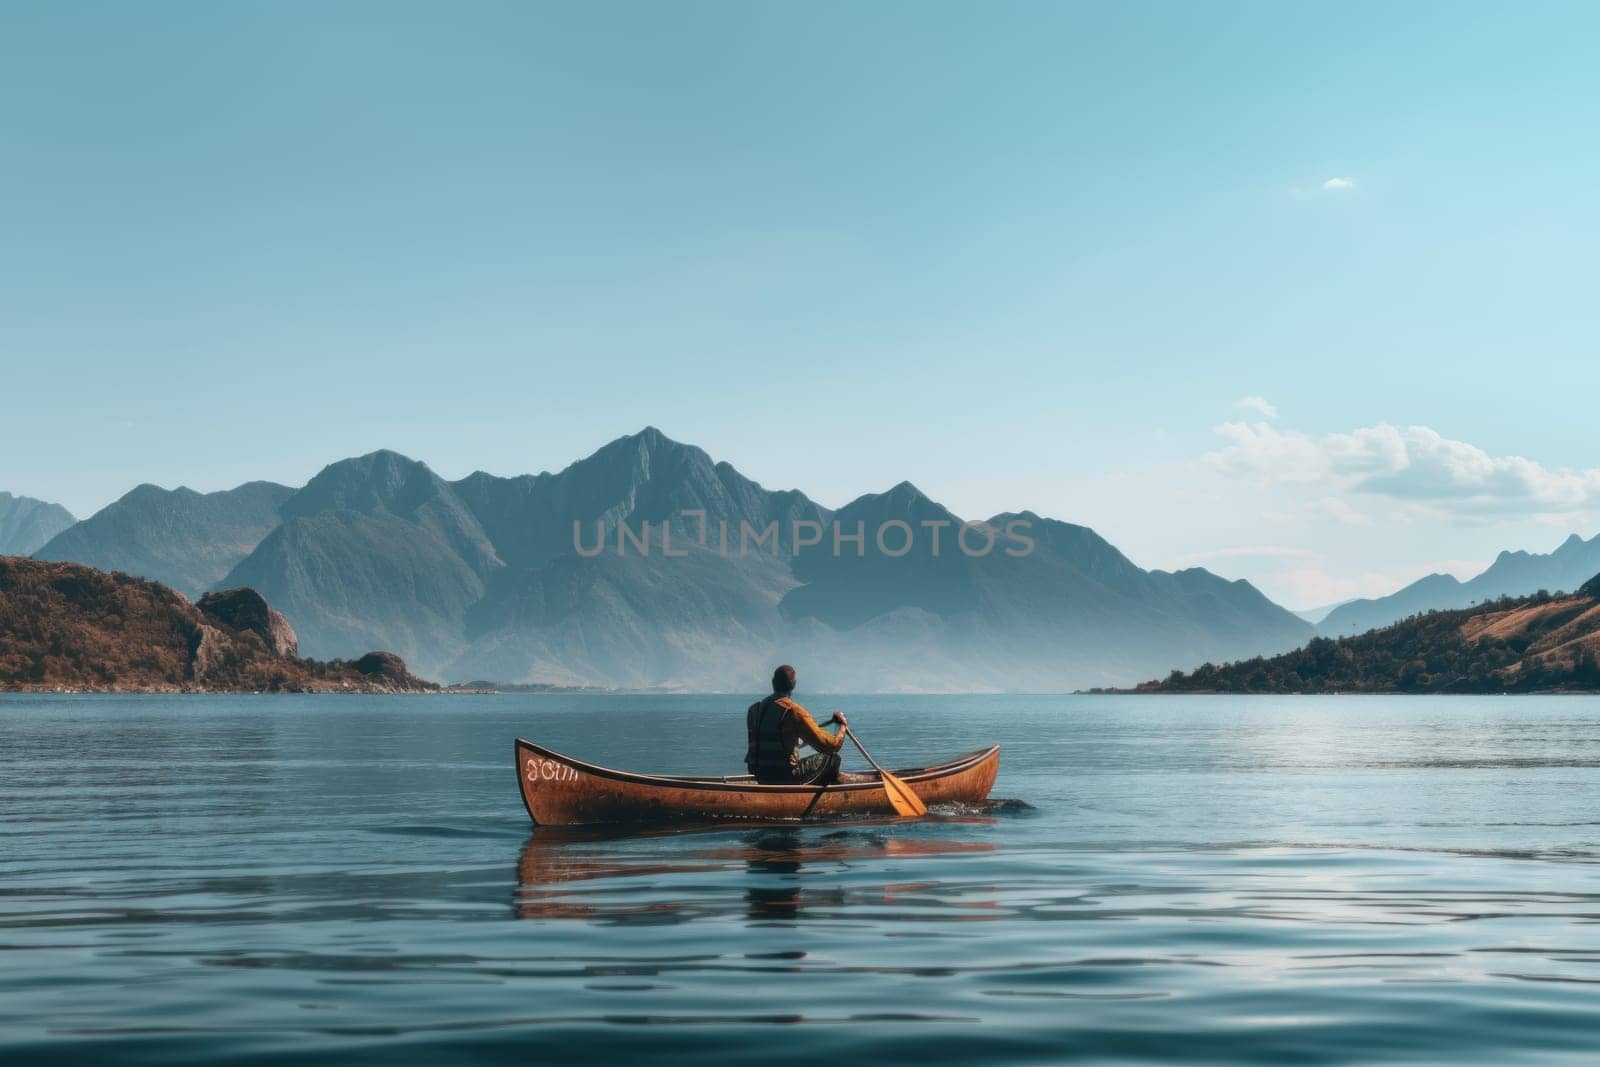 Canoe in the middle of the lake, mountains and clear sky background.